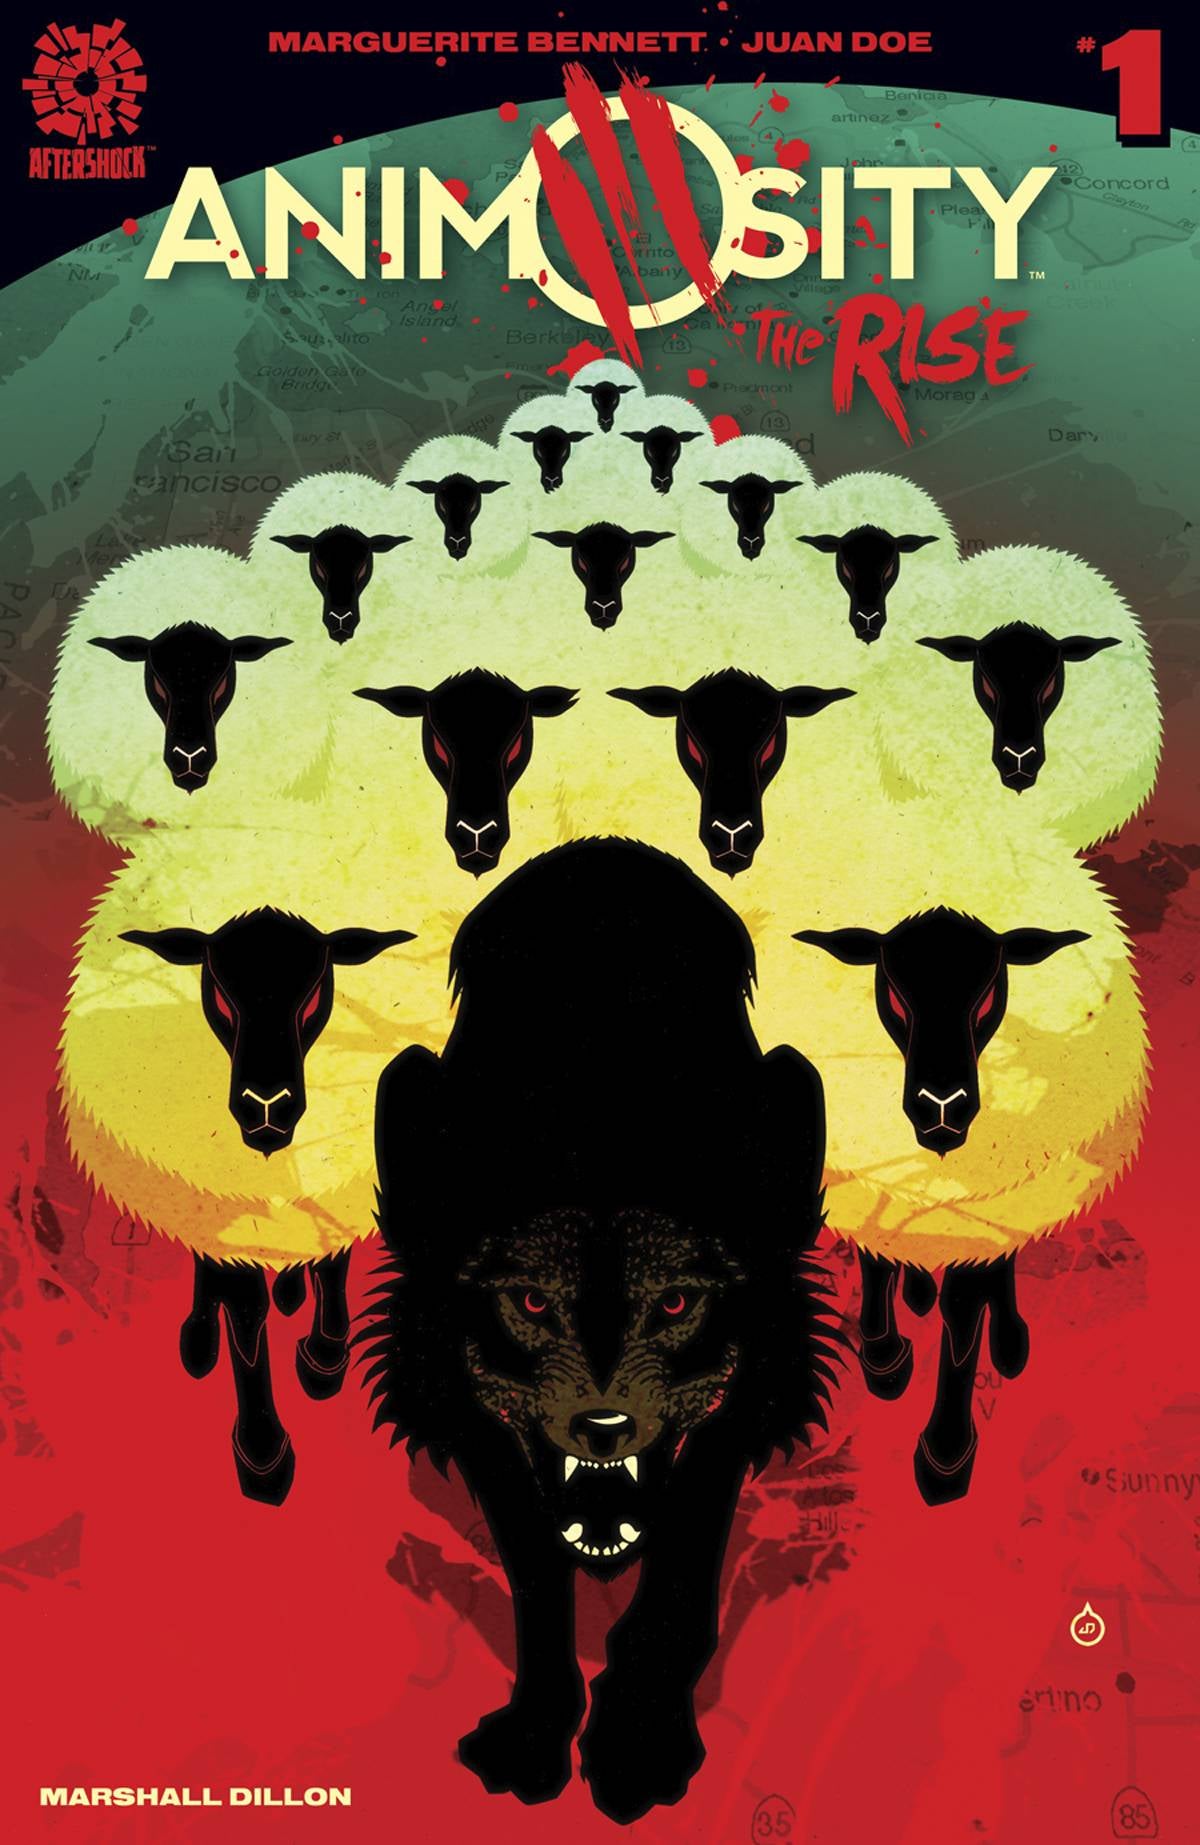 ANIMOSITY THE RISE #1 ONE SHOT